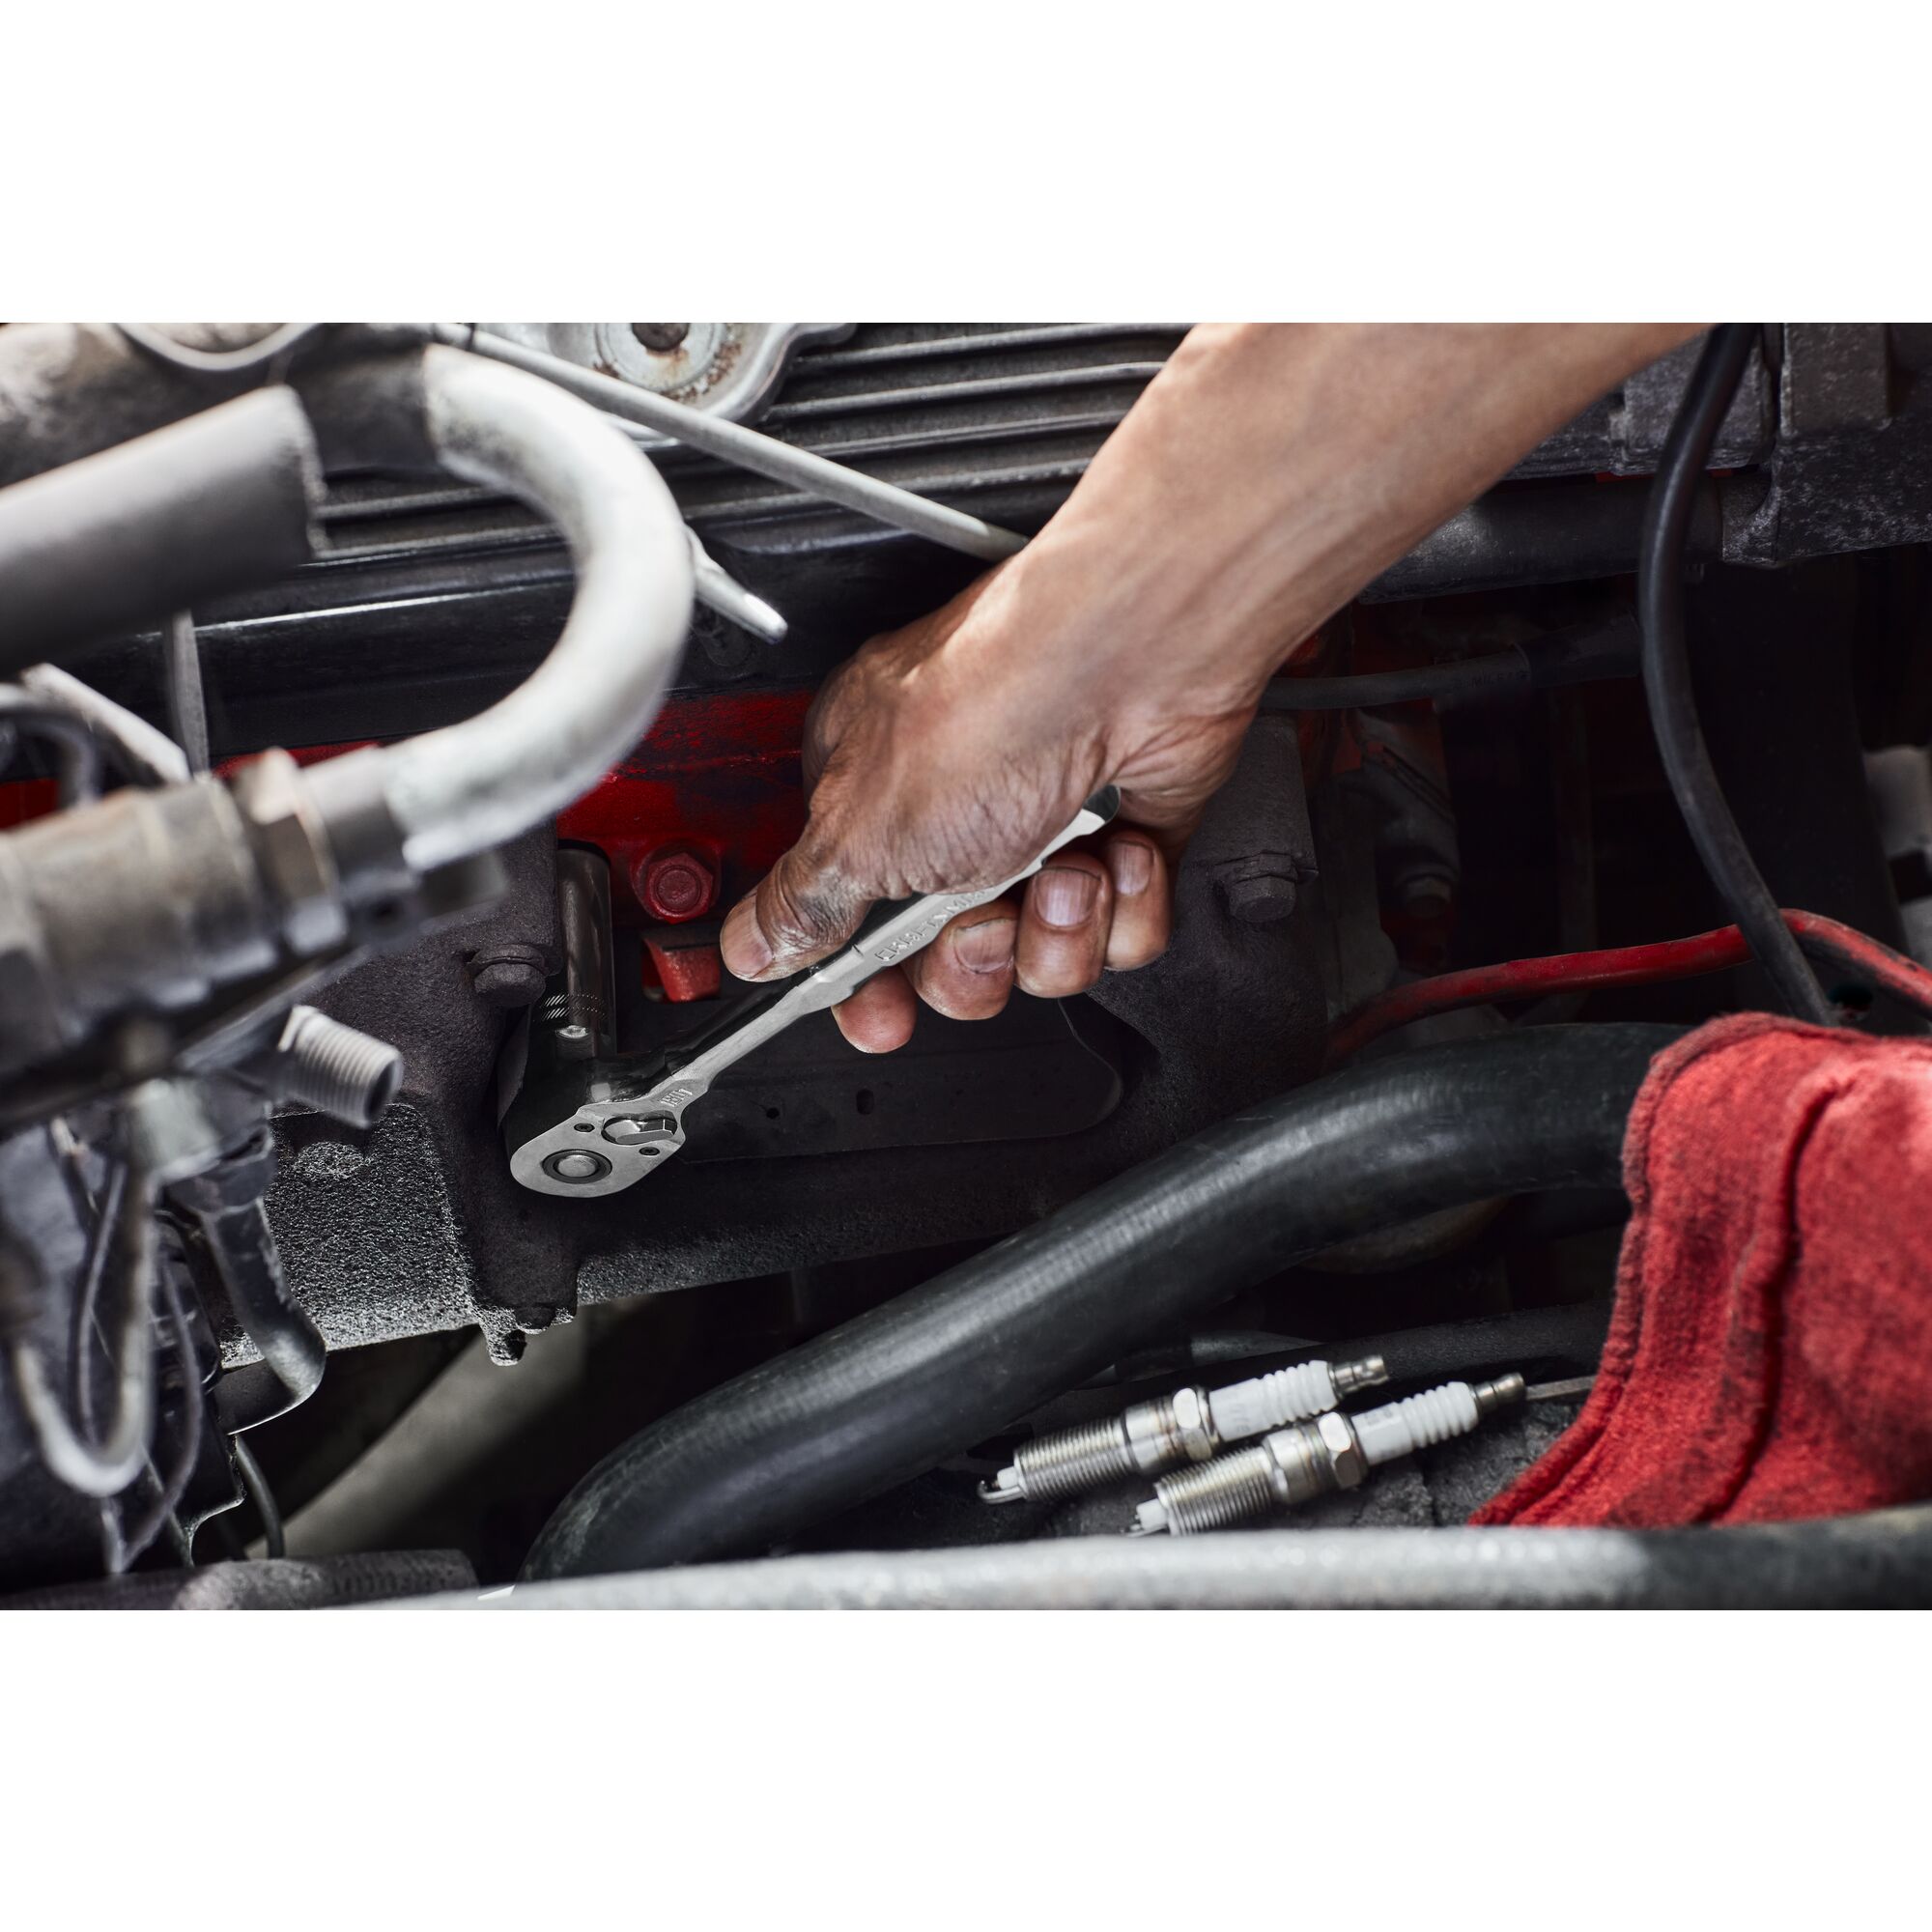 User removing spark plug in a tight area